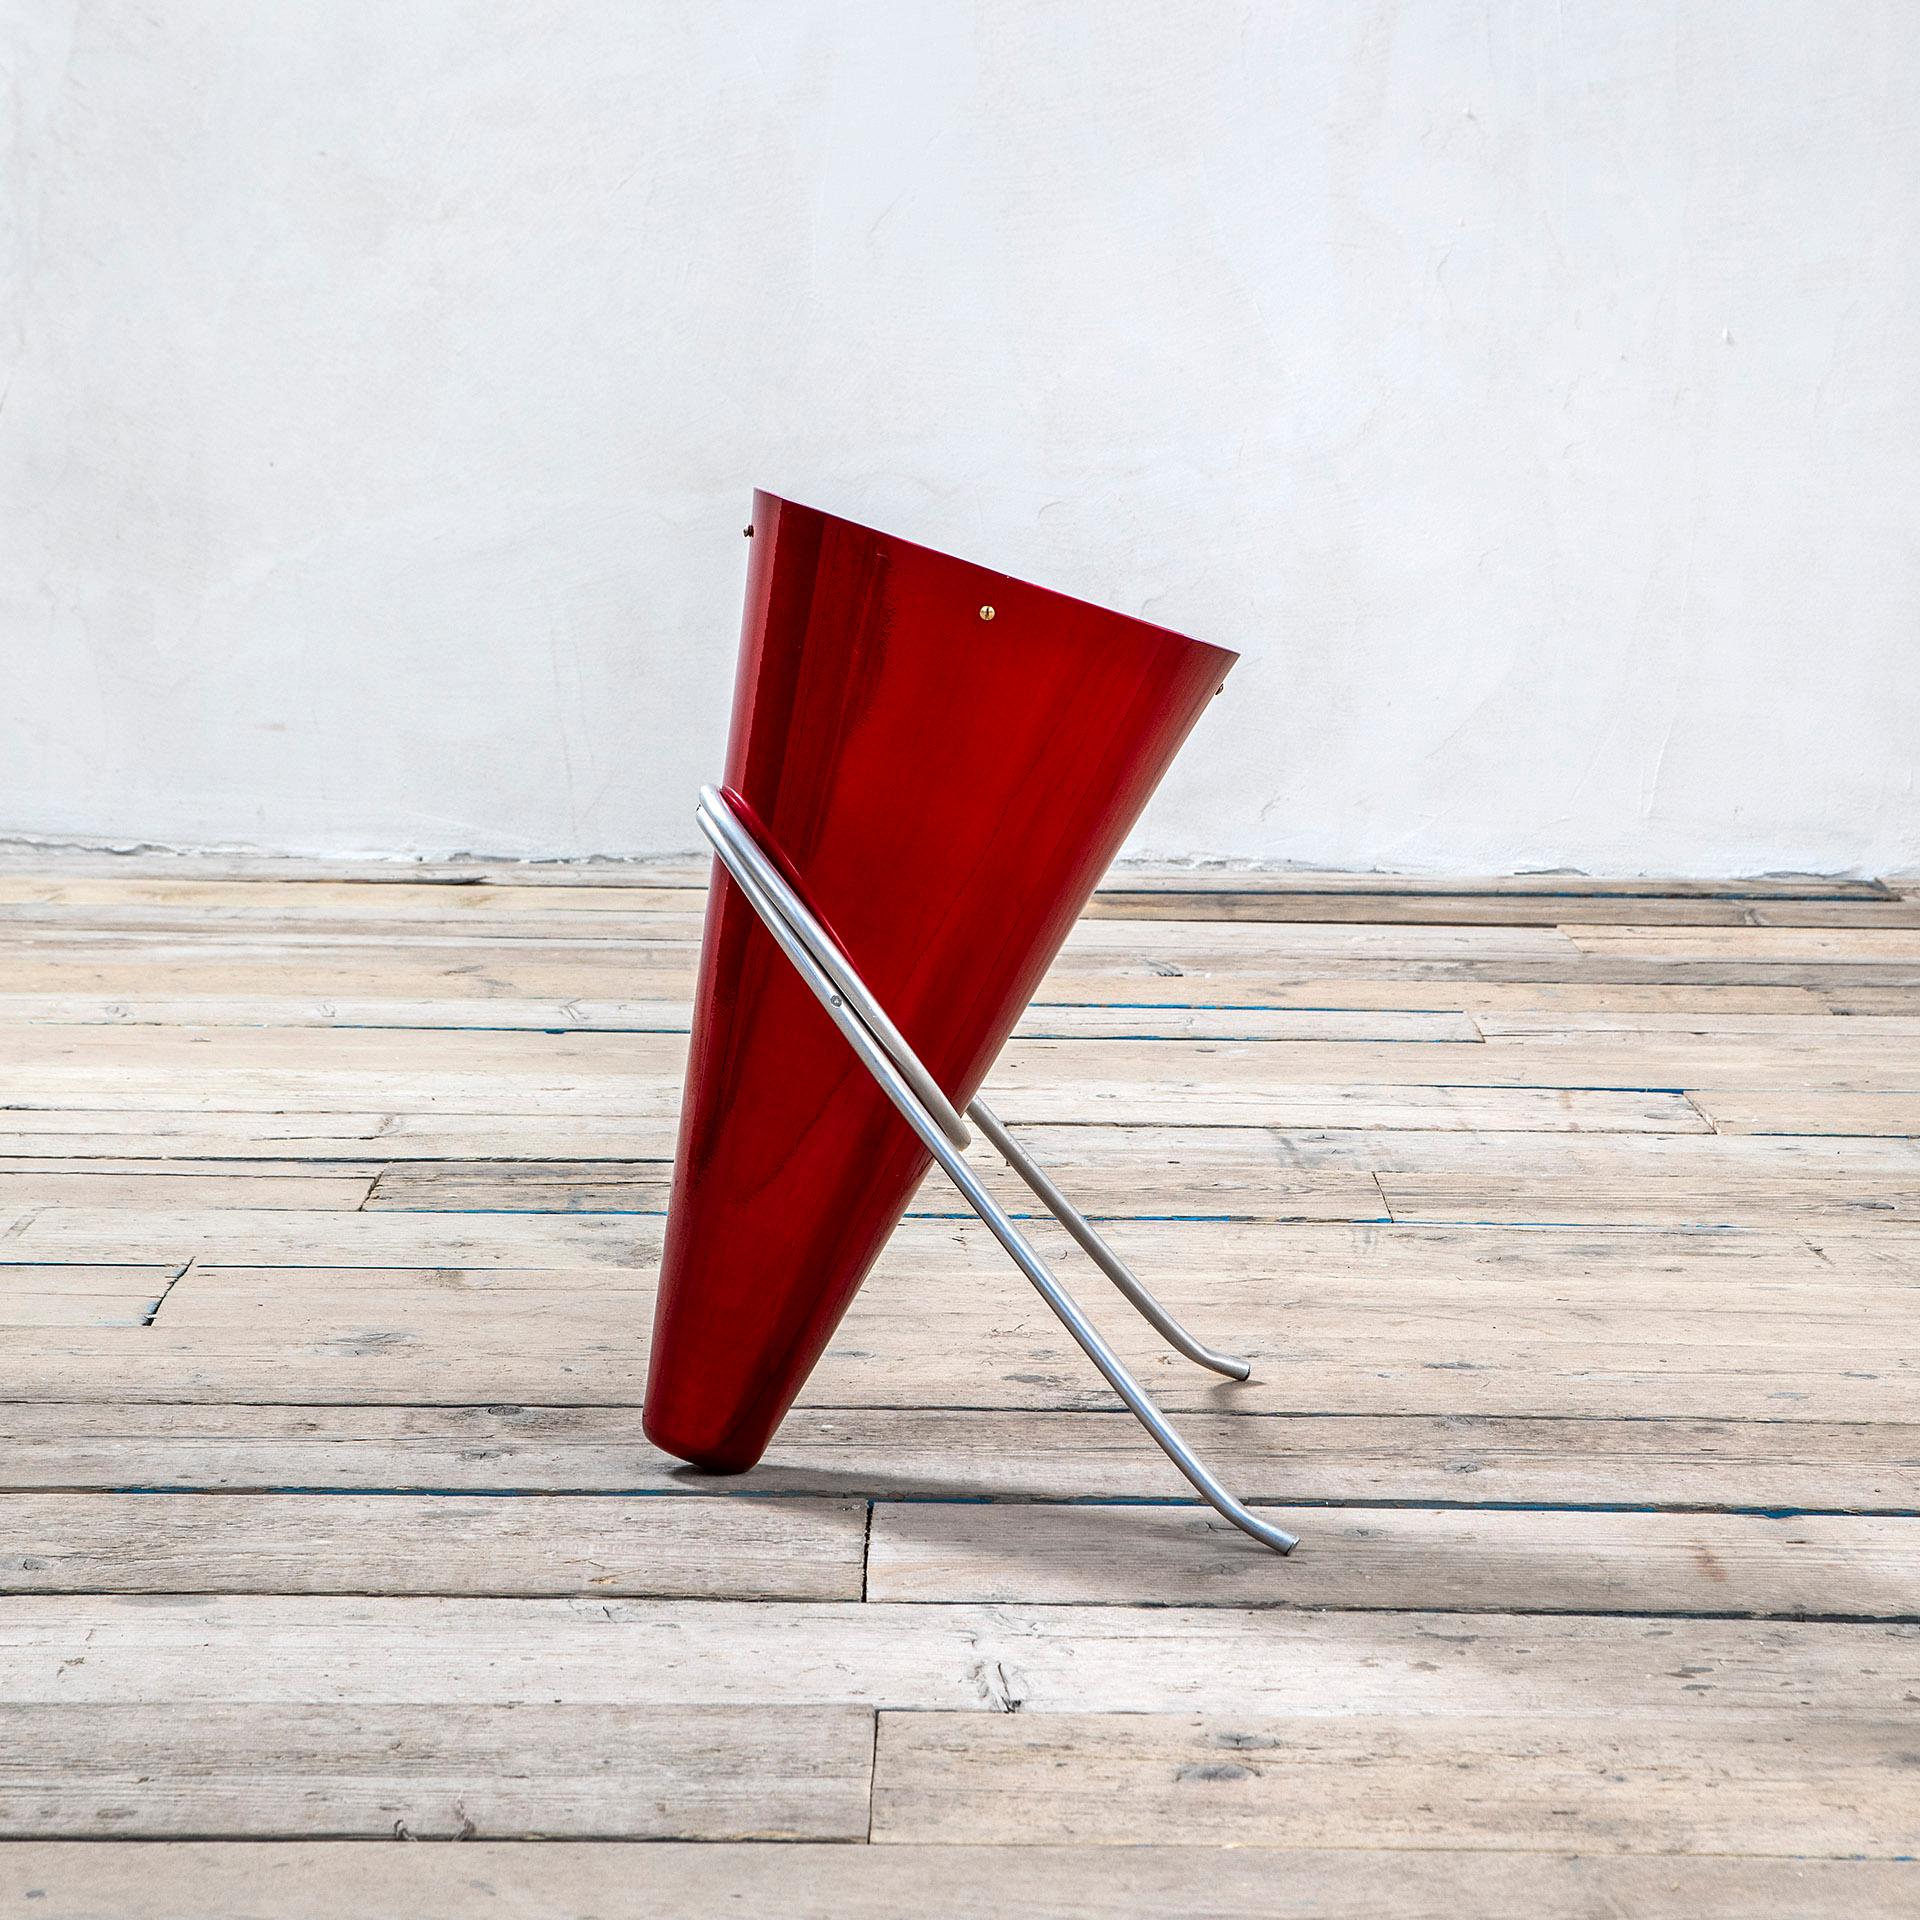 Umbrella standing designed by the master of Italian Design Ettore Sottsass, for the manufacturer Rinnovel in '70s. For Rinnovel, Sottsass designed different pieces, but this item is one of the most representative. The Umbrella Stand is in red